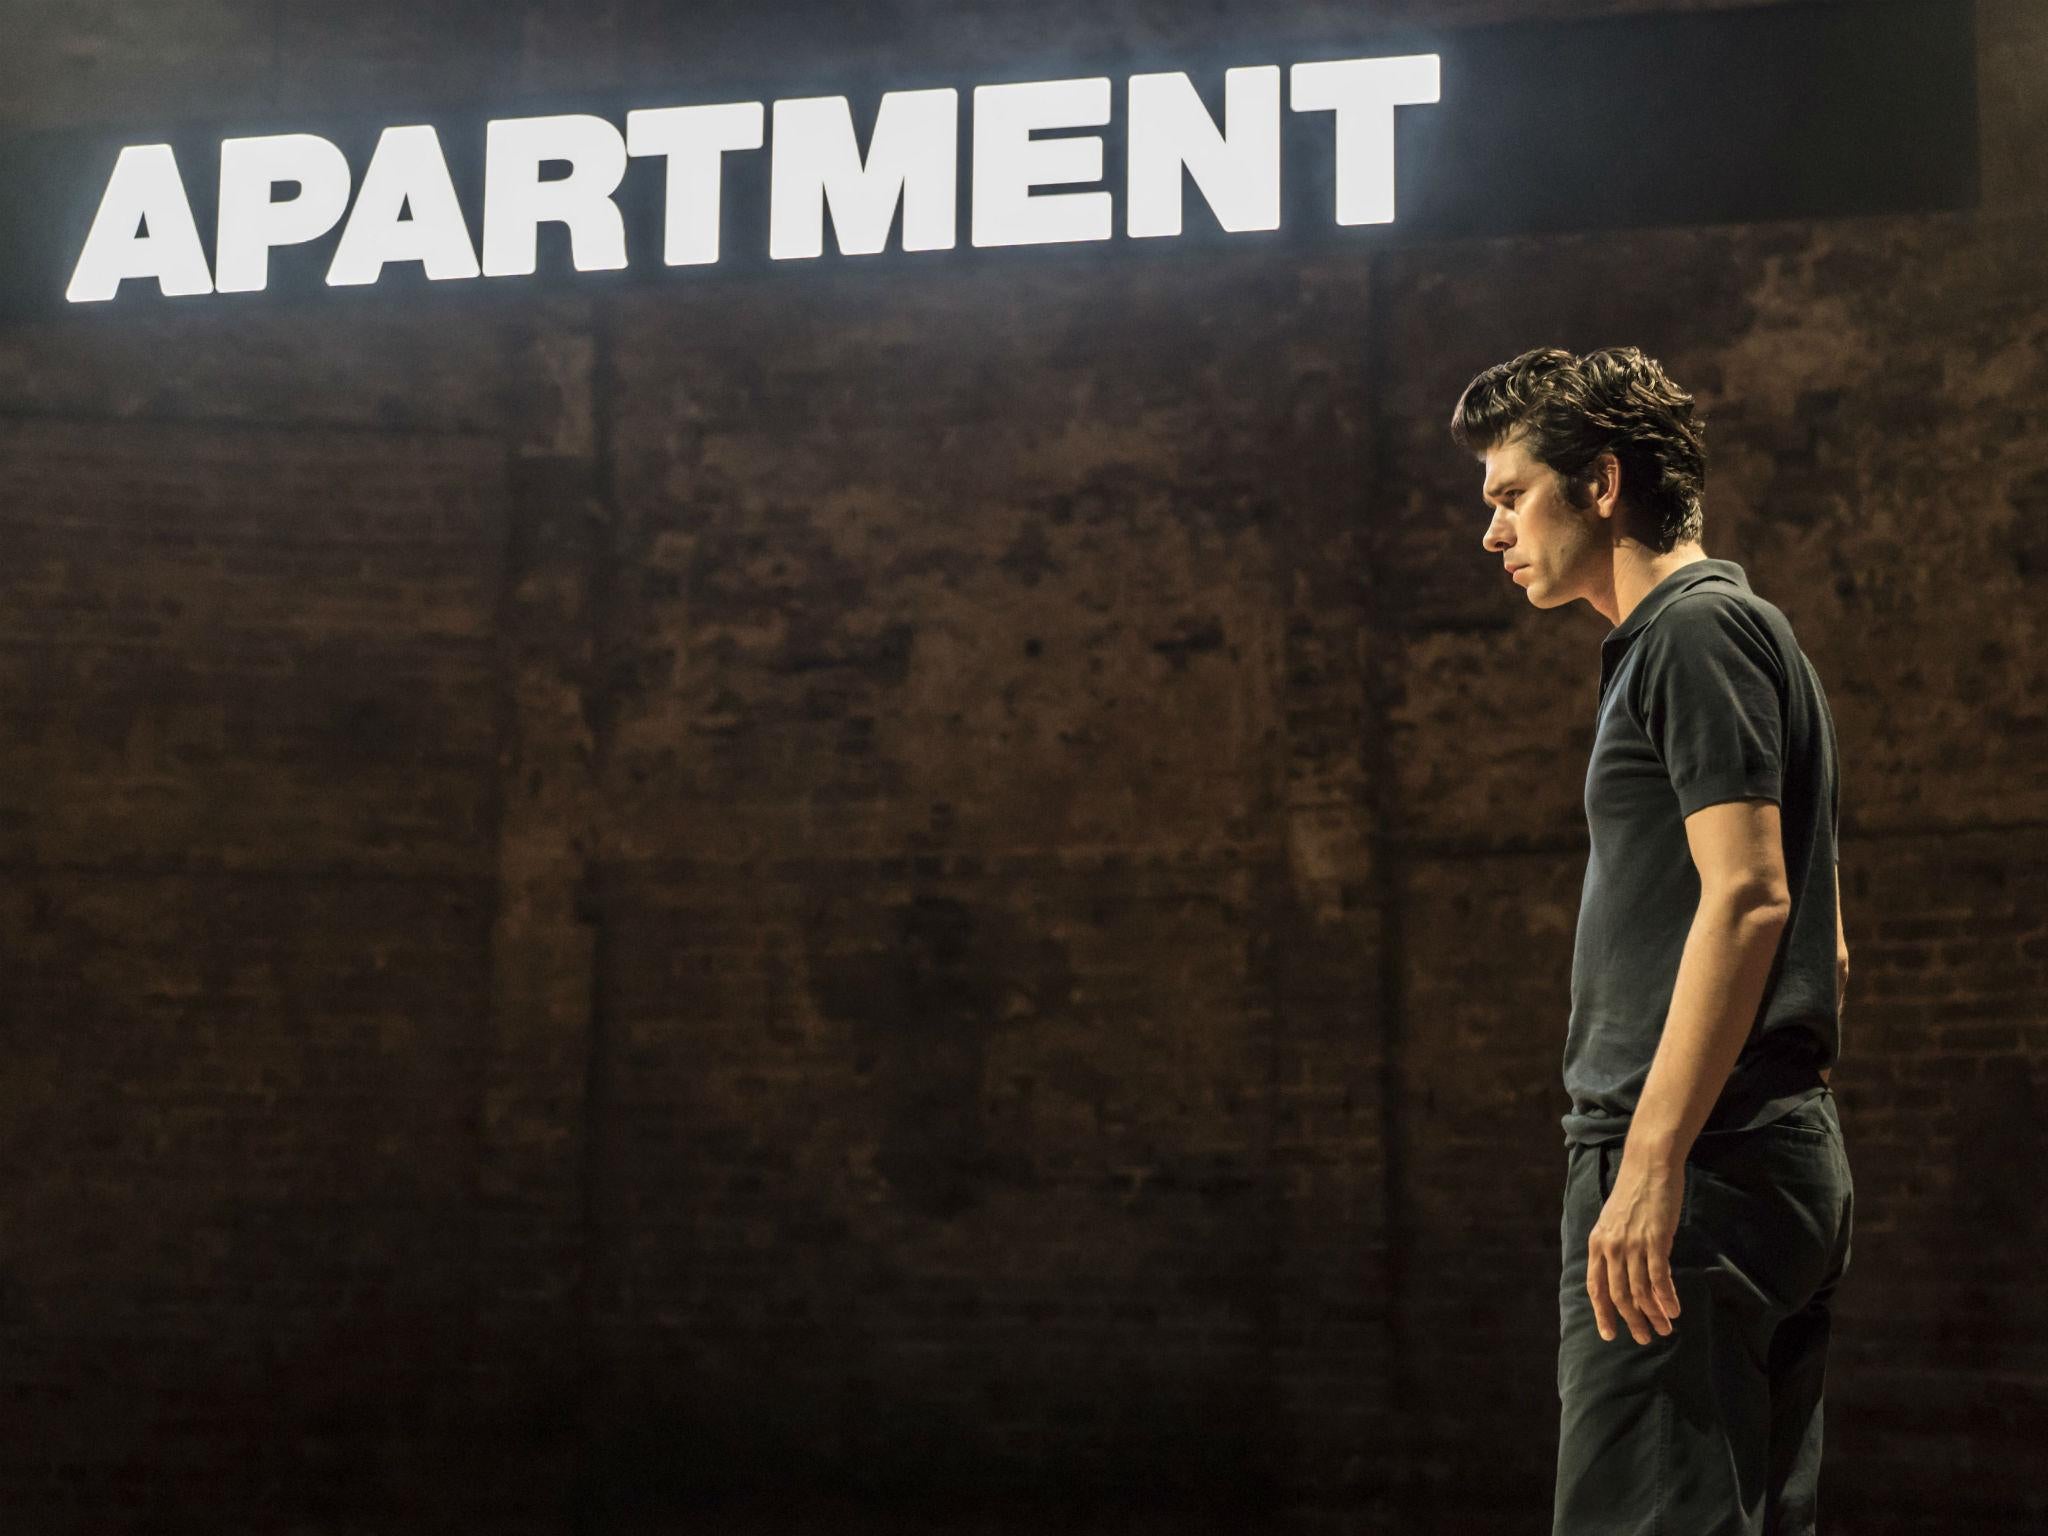 Whishaw’s genius for suggesting ambiguity is harnessed more quietly in this production